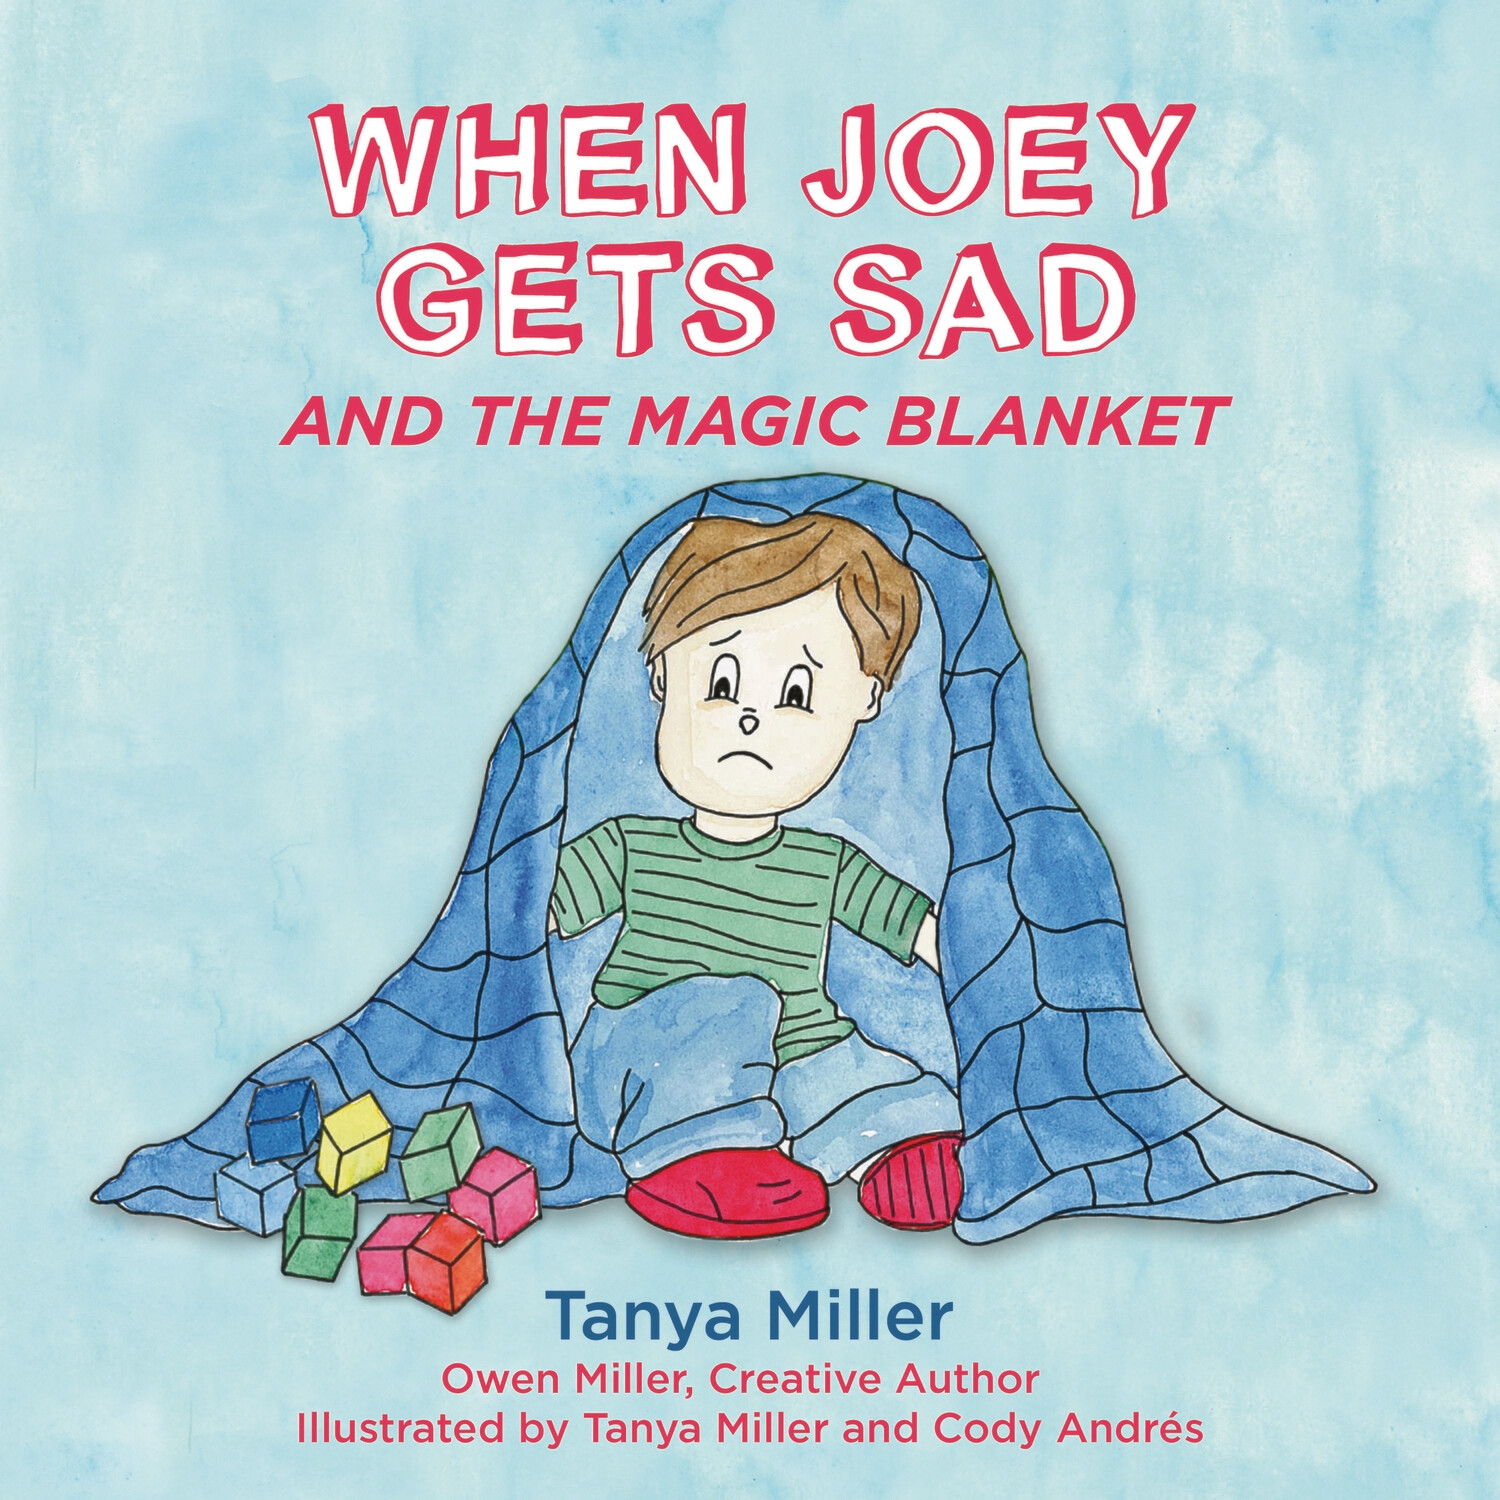 When Joey Gets Sad and the Magic Blanket by Tanya Miller